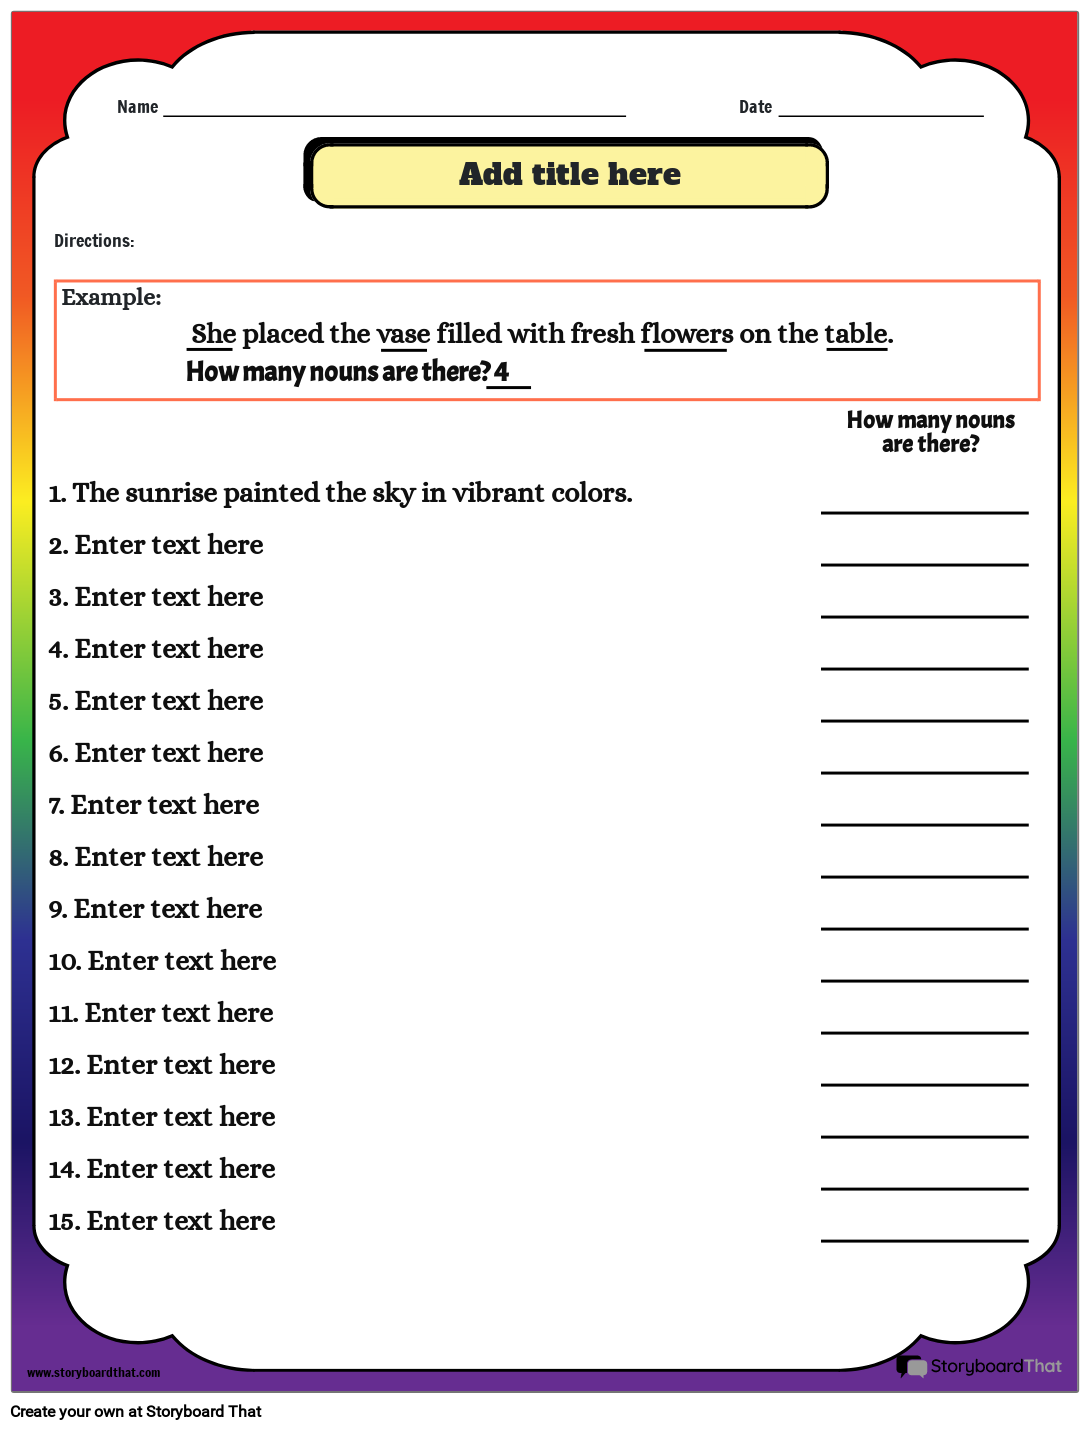 counting-nouns-in-a-sentence-worksheet-storyboard